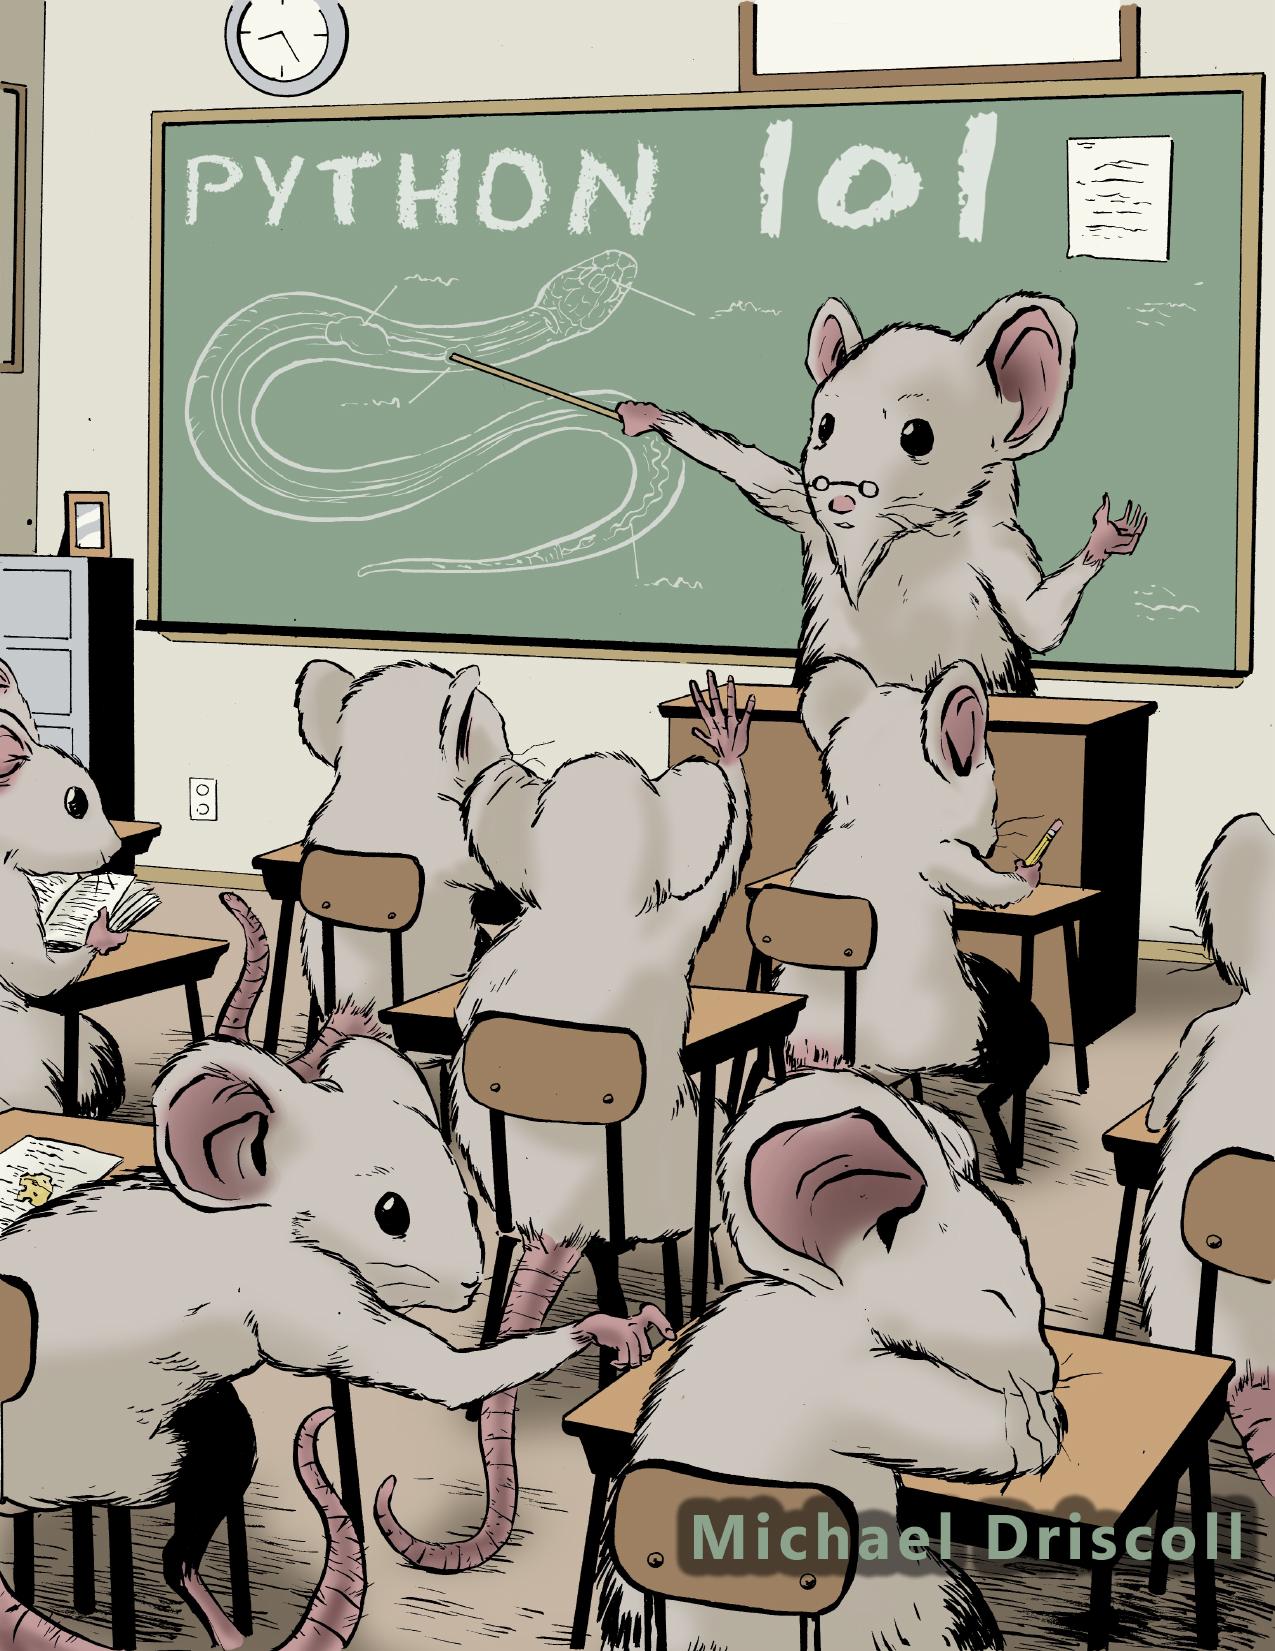 Python 101 by Michael Driscoll